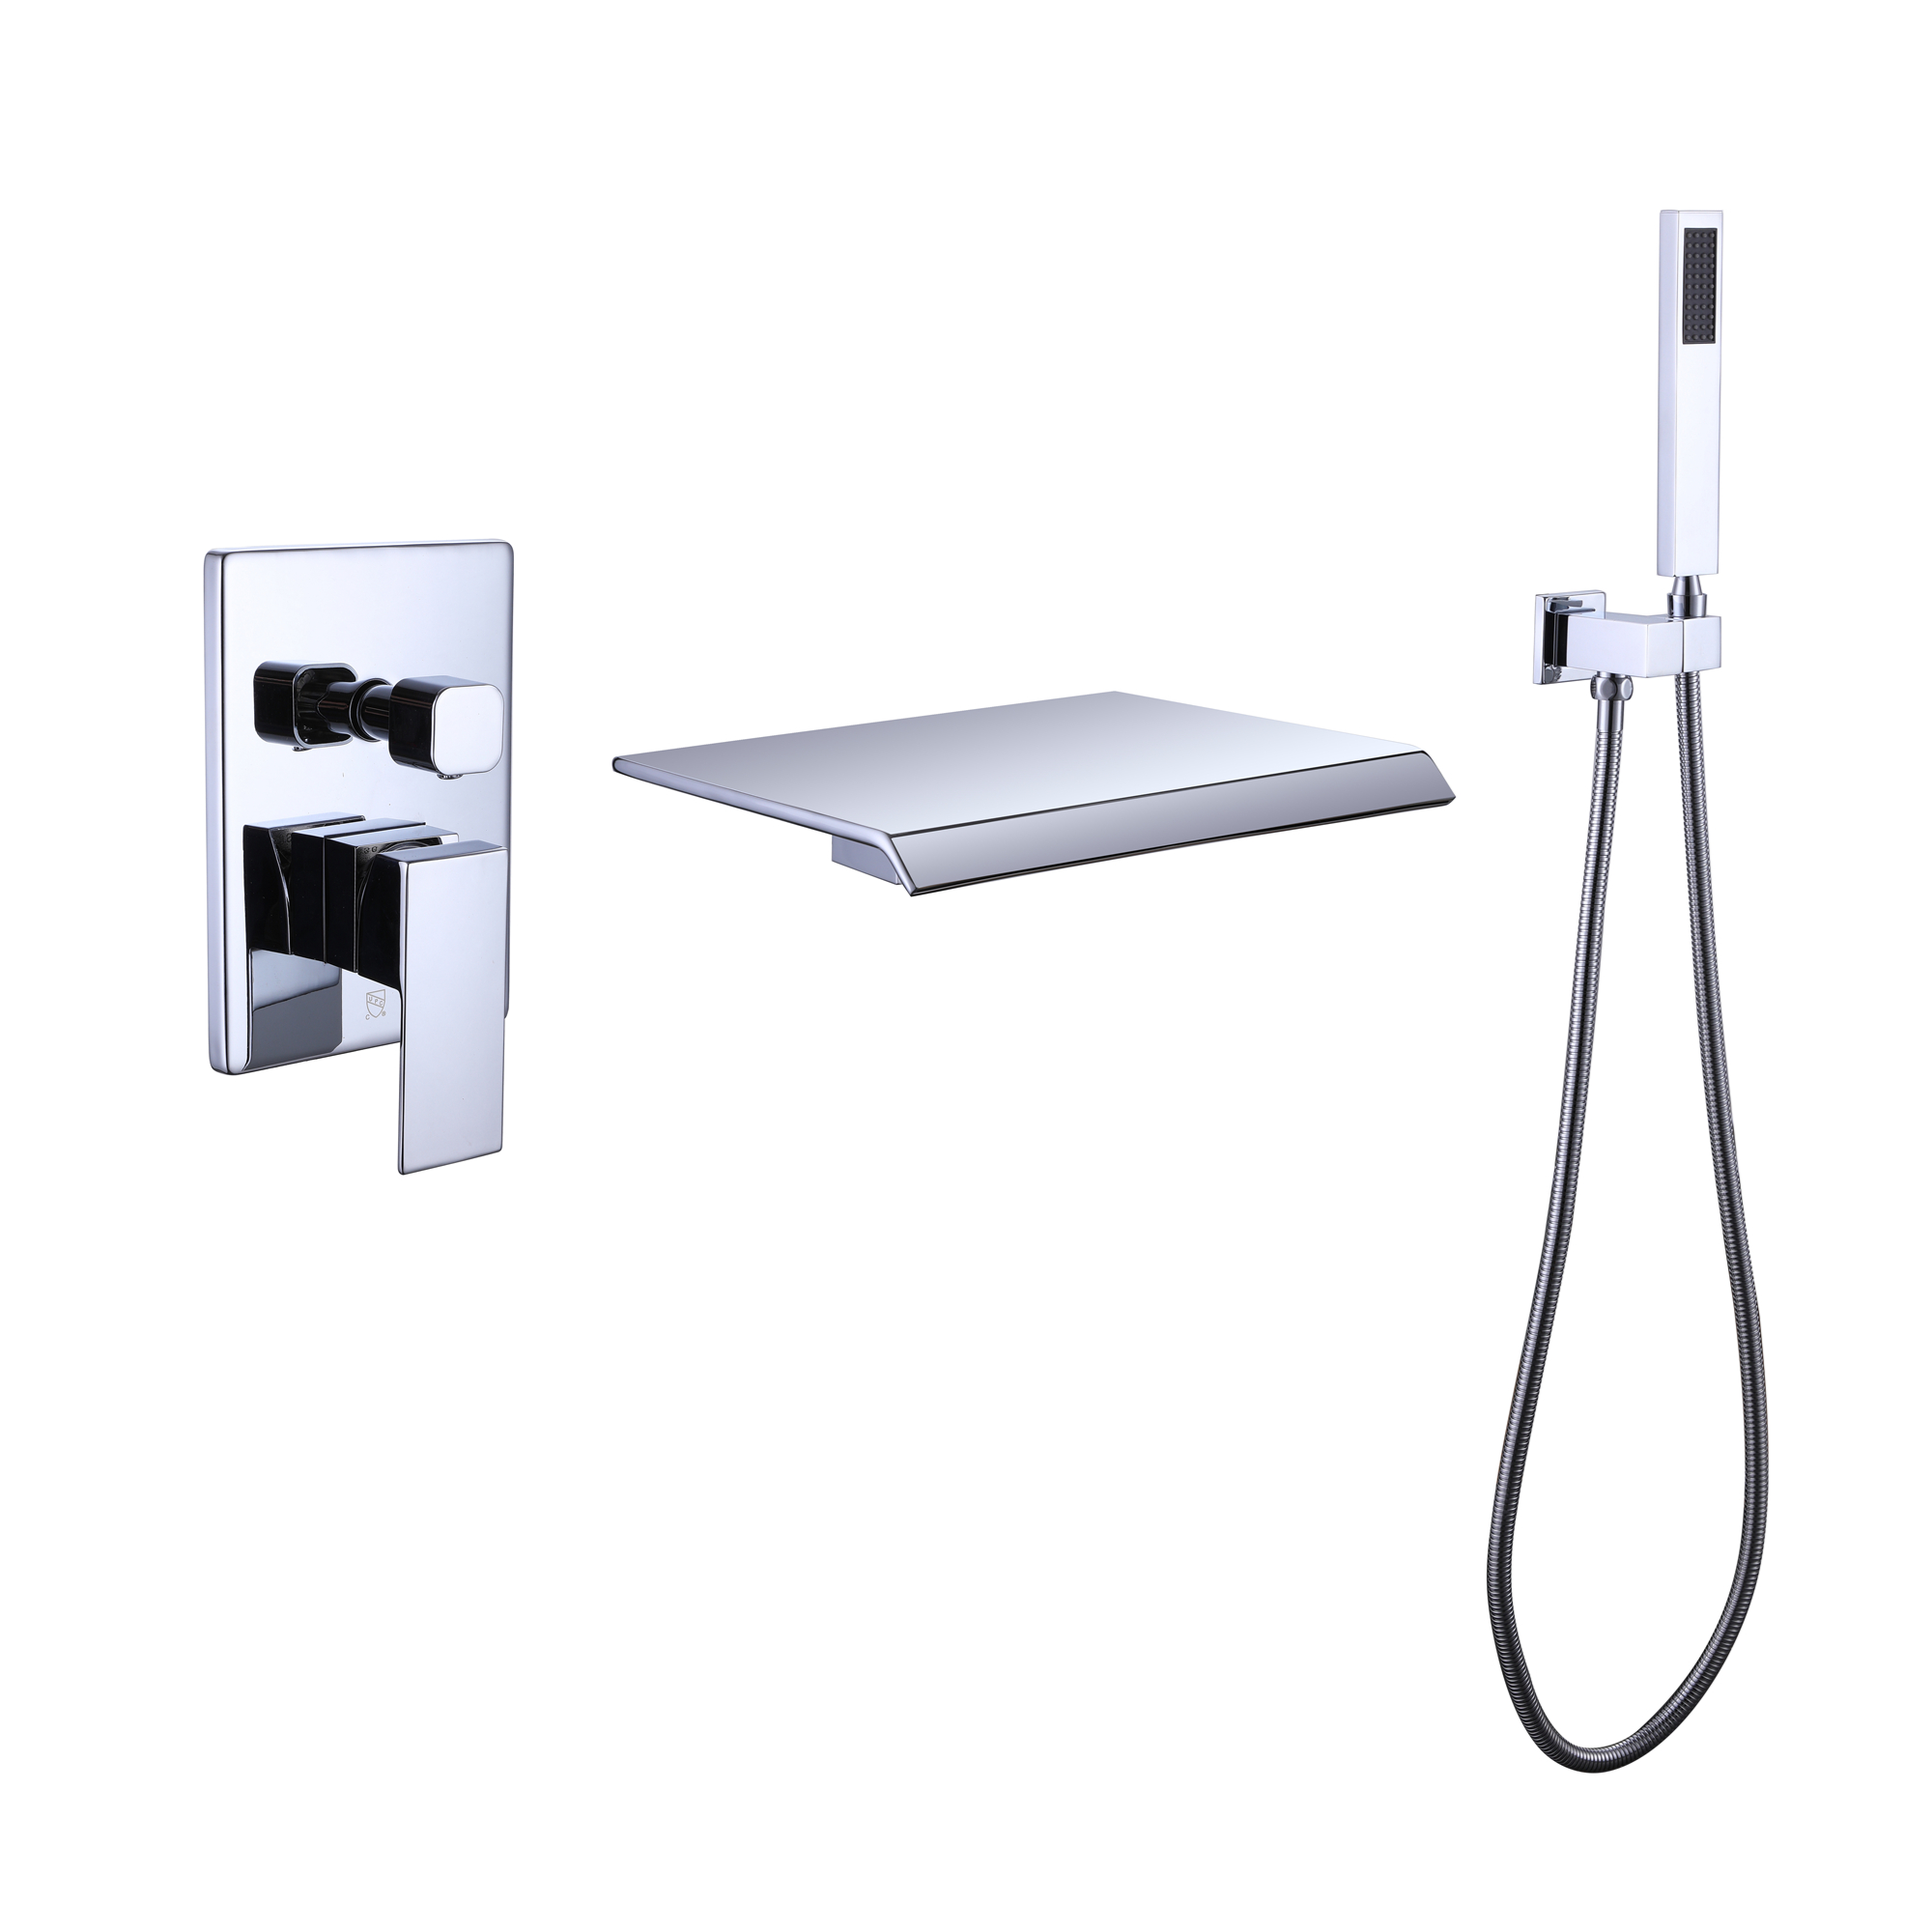 TrustMade Pressure-Balance Waterfall Single Handle Wall Mount Tub Faucet with Hand Shower, Chrome - 2W02-Boyel Living